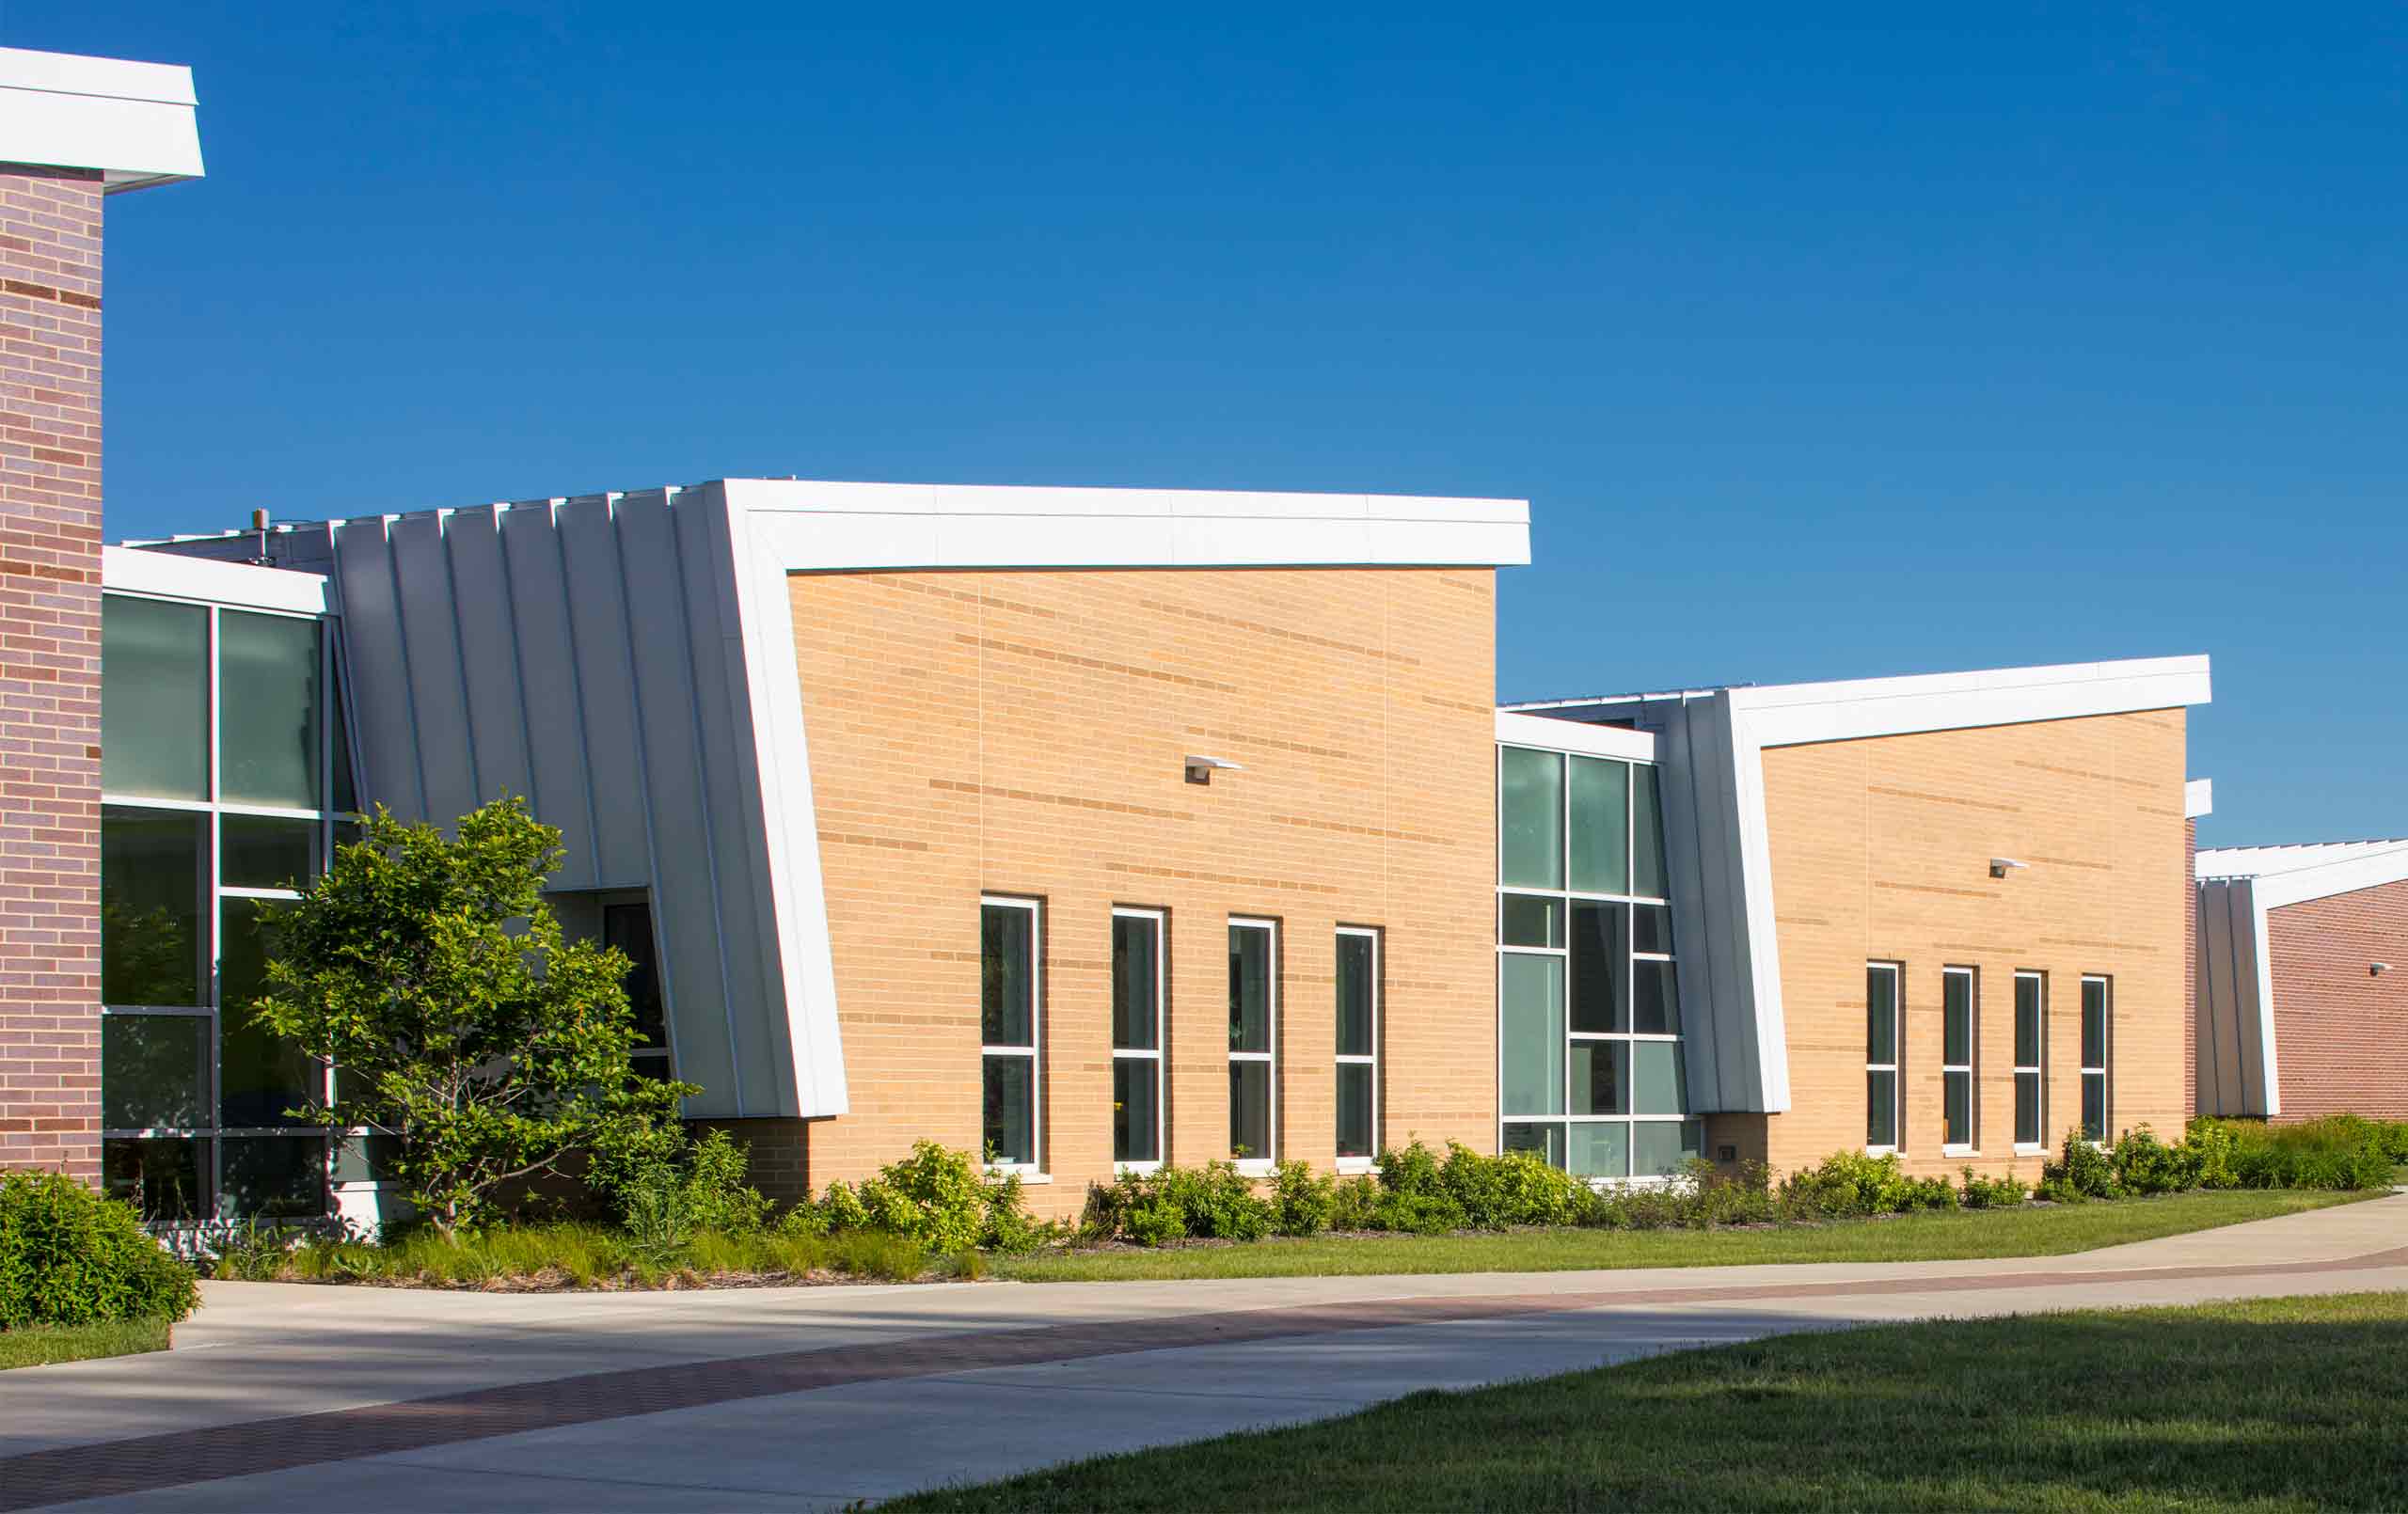 CCSD 59 Early Learning Center exterior featuring brick facades and sloping metal roofs